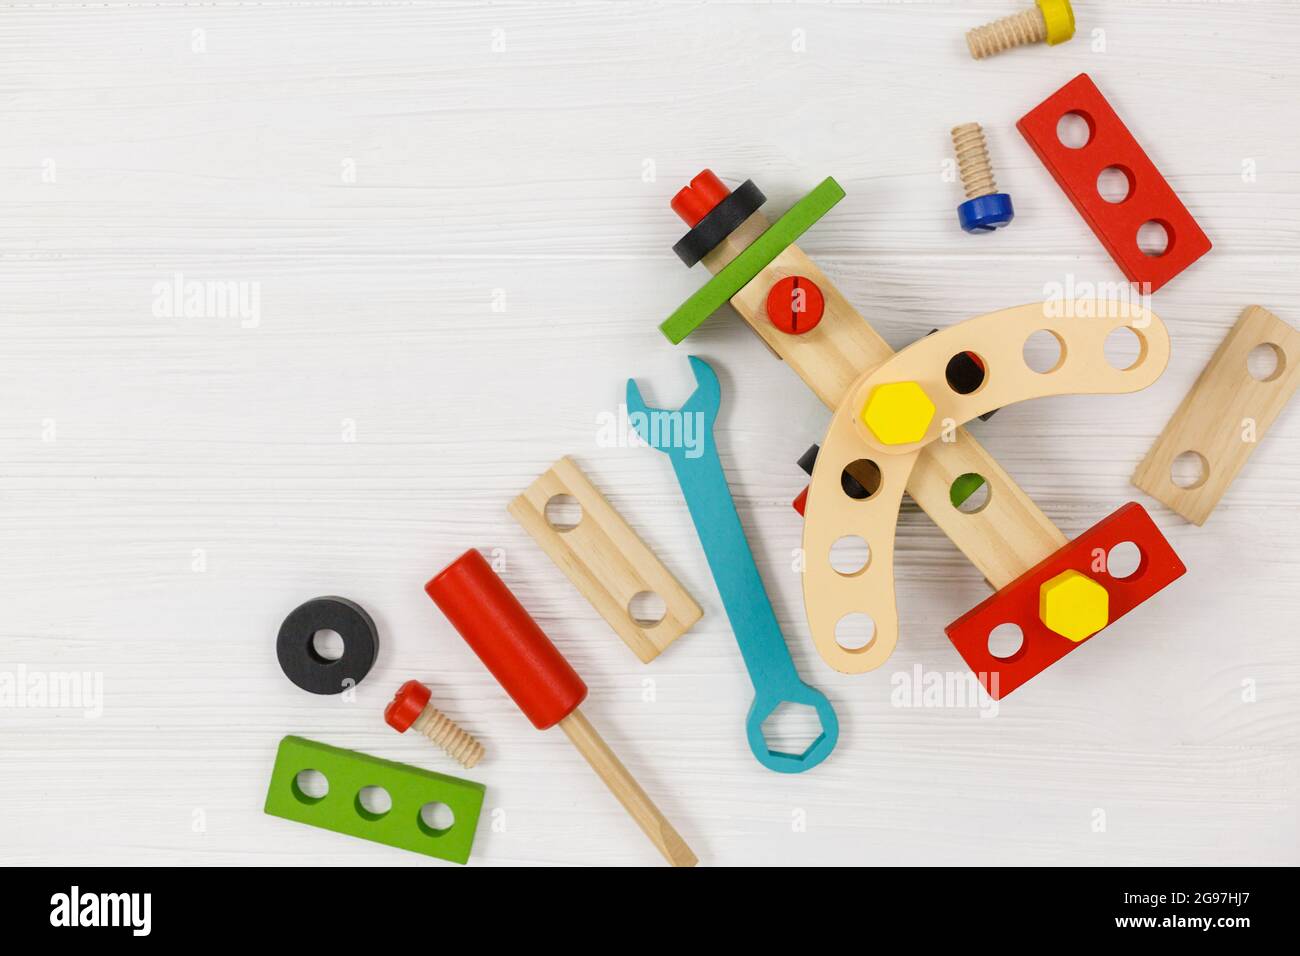 A colorful wooden building kit, plane for children on wood. Set of tools on white wooden table. Games and tools for kids in kindergarten, preschool Stock Photo